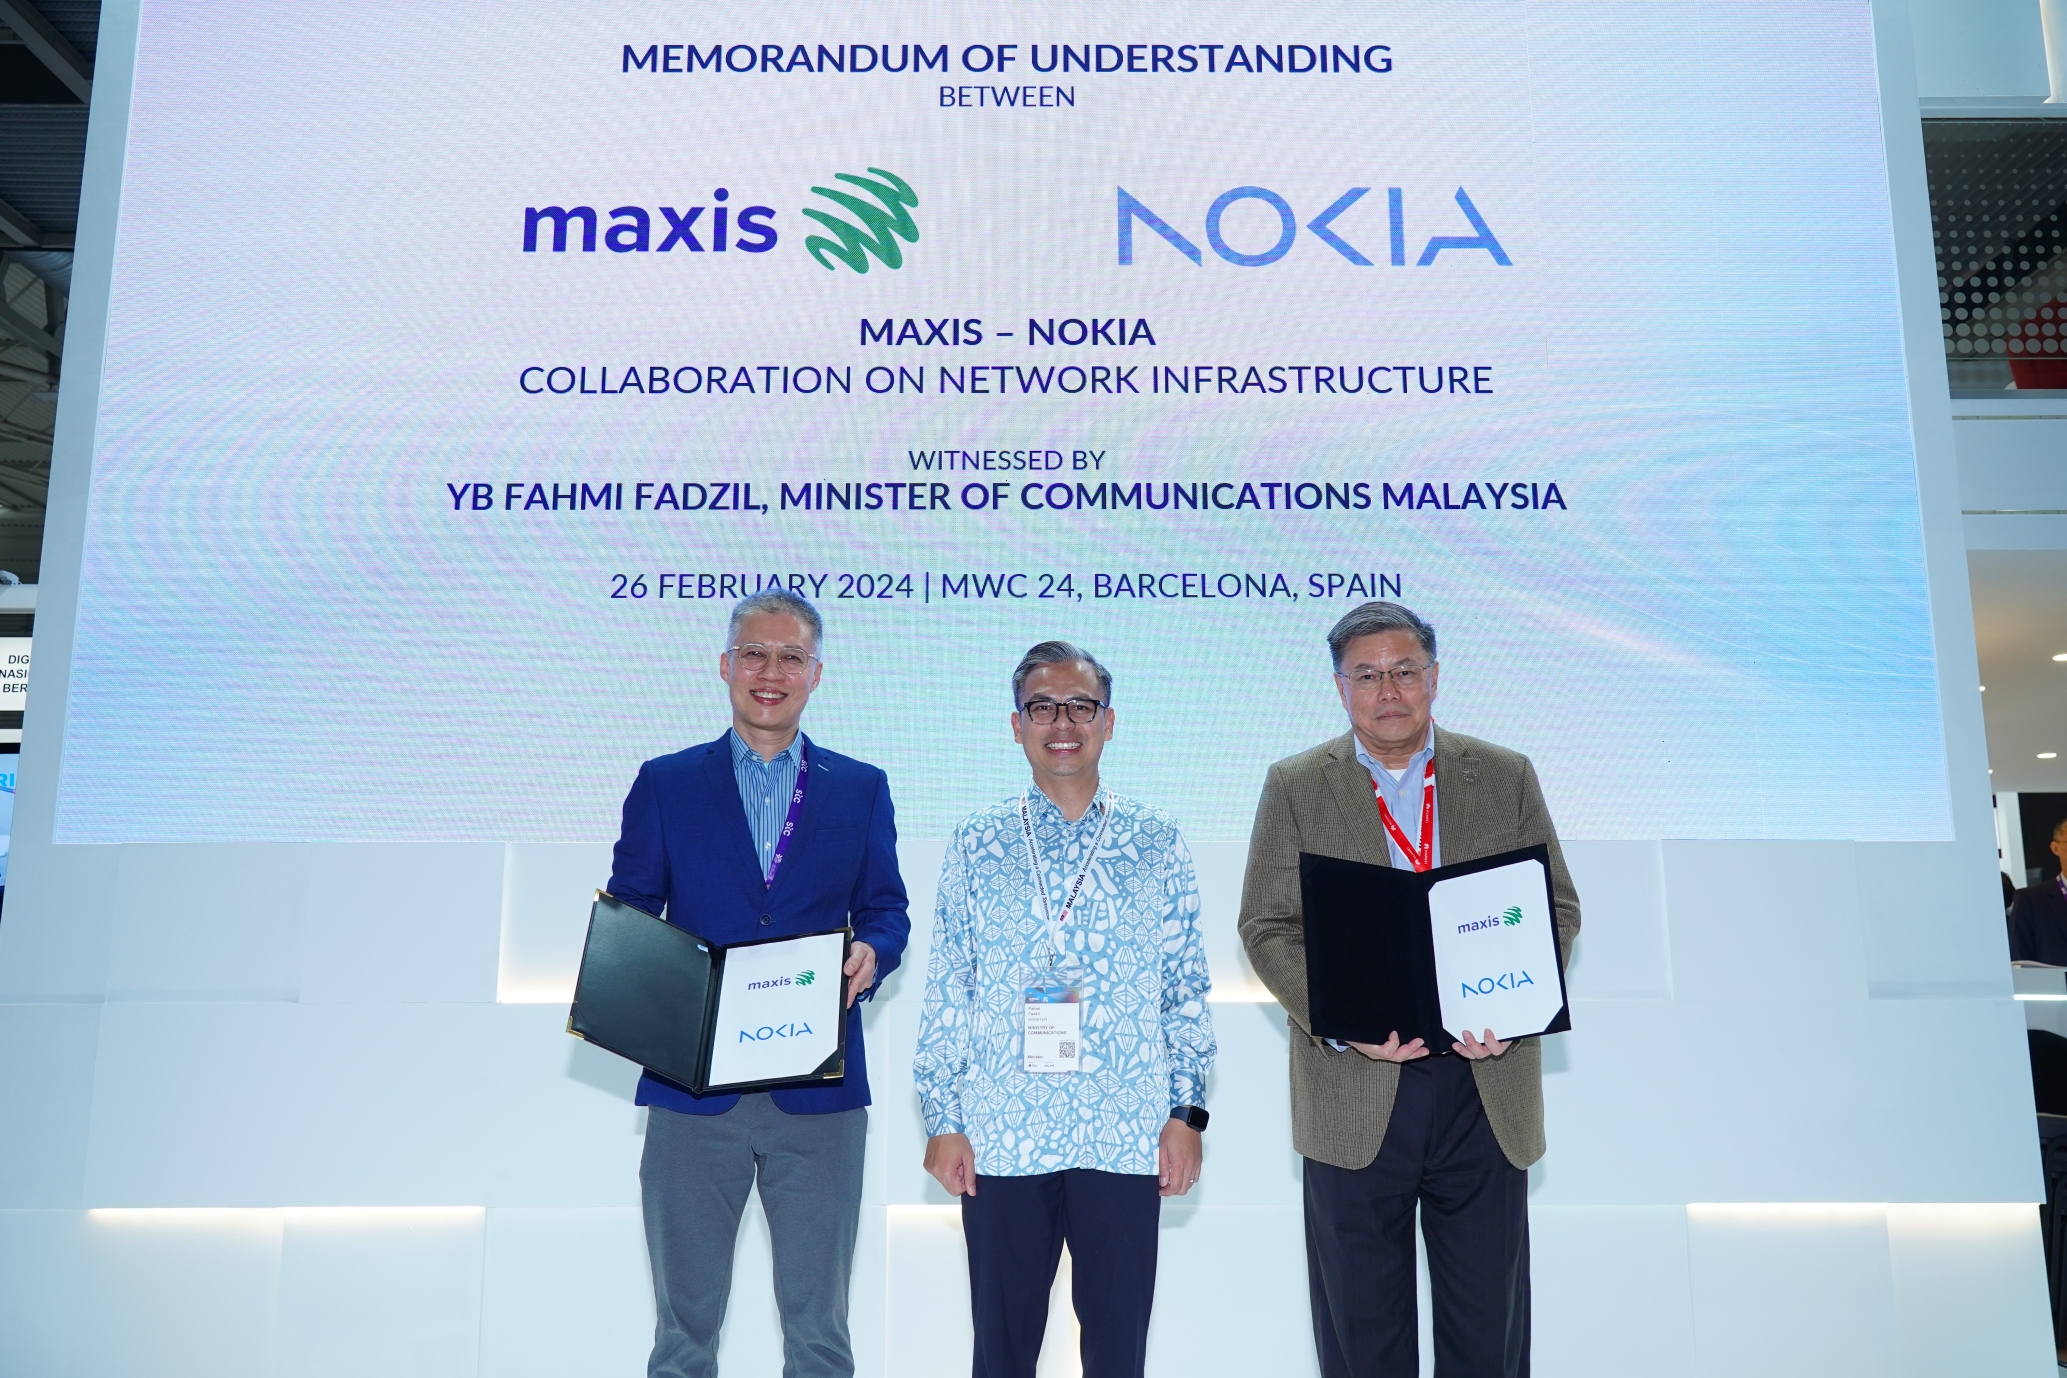 Maxis x Nokia MoU at MWC 2024